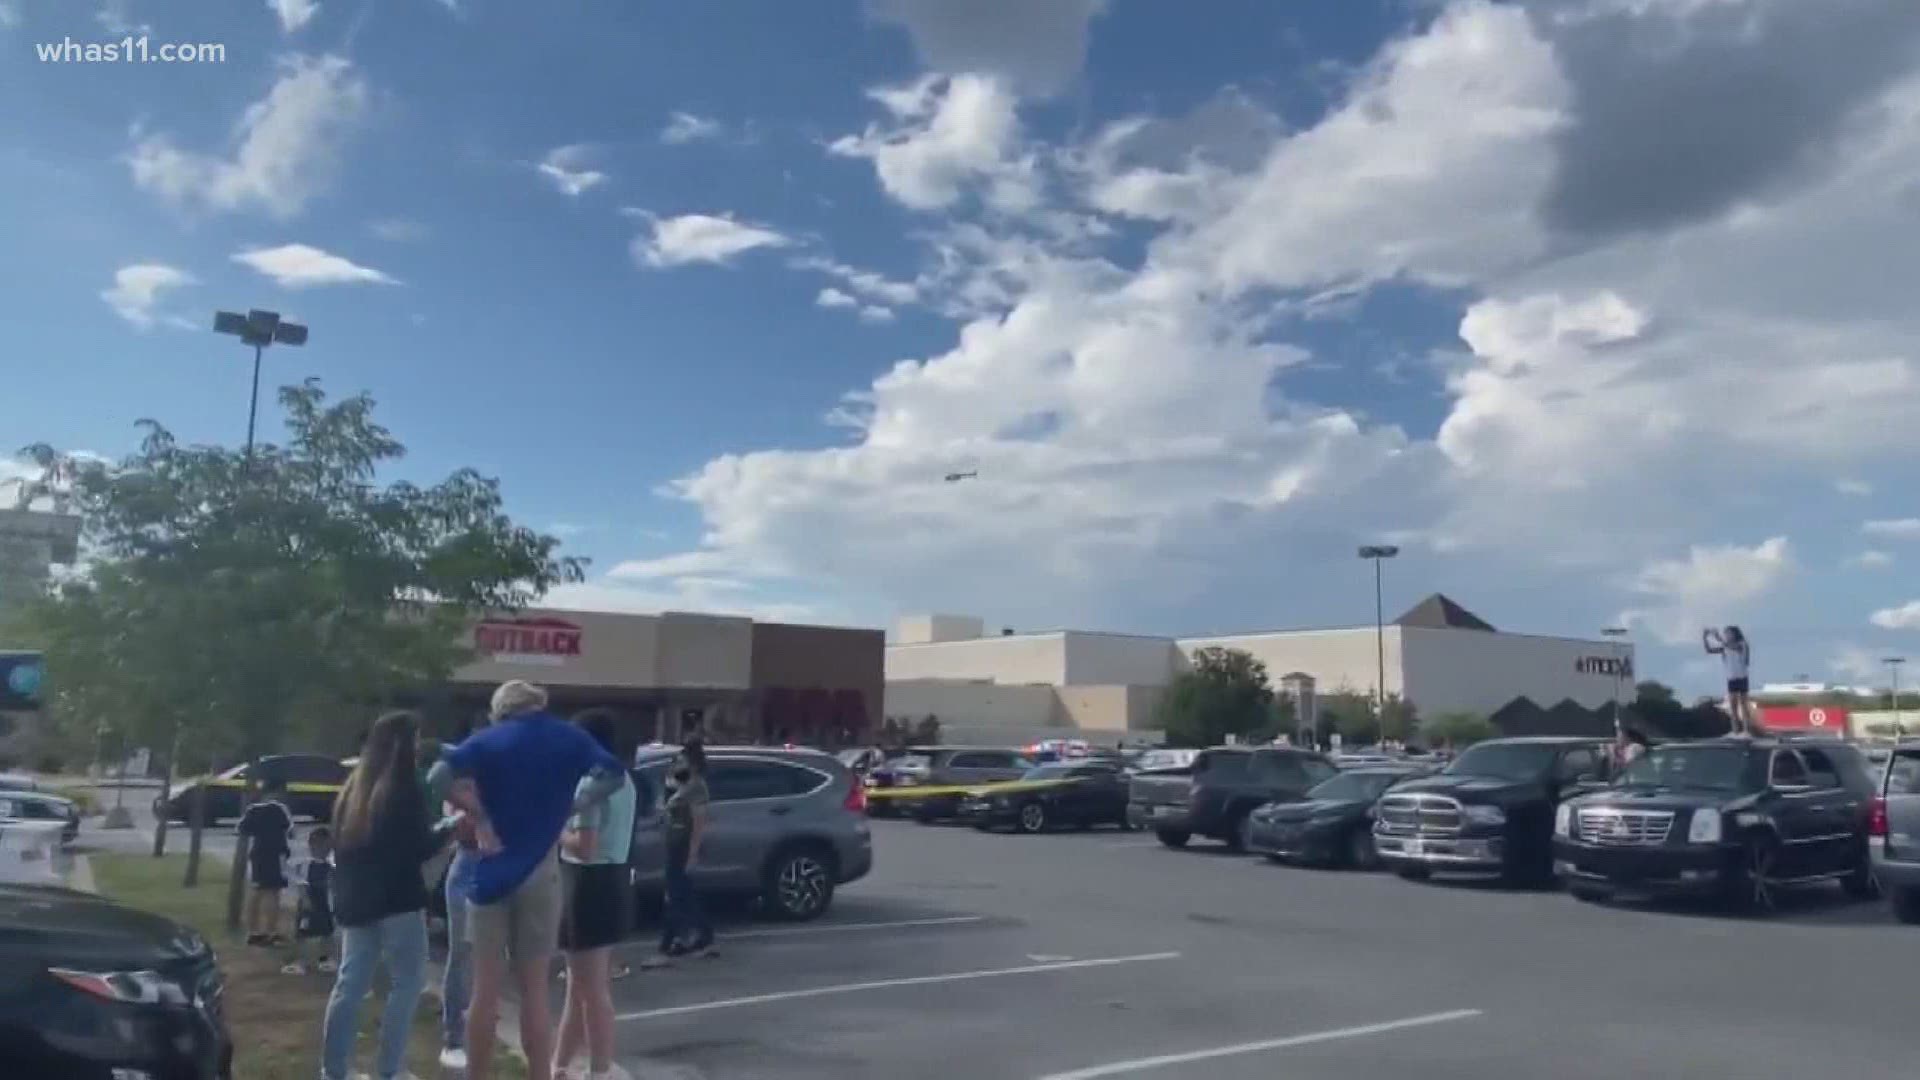 Lexington Police said one person has died and two others injured following a shooting at the mall Sunday afternoon.